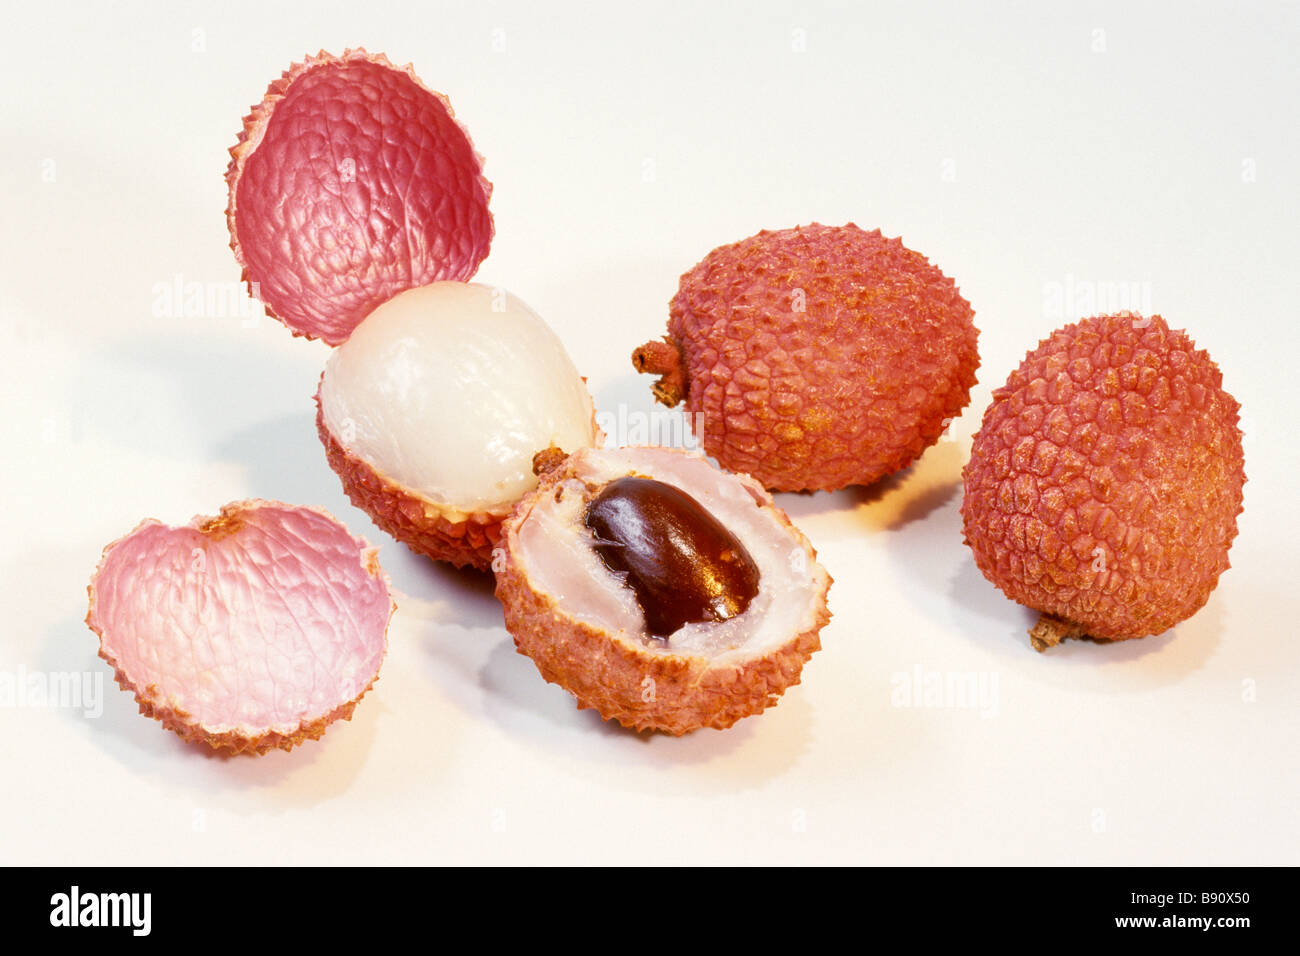 Lychee (Litchi chinensis),fruits, studio picture Stock Photo